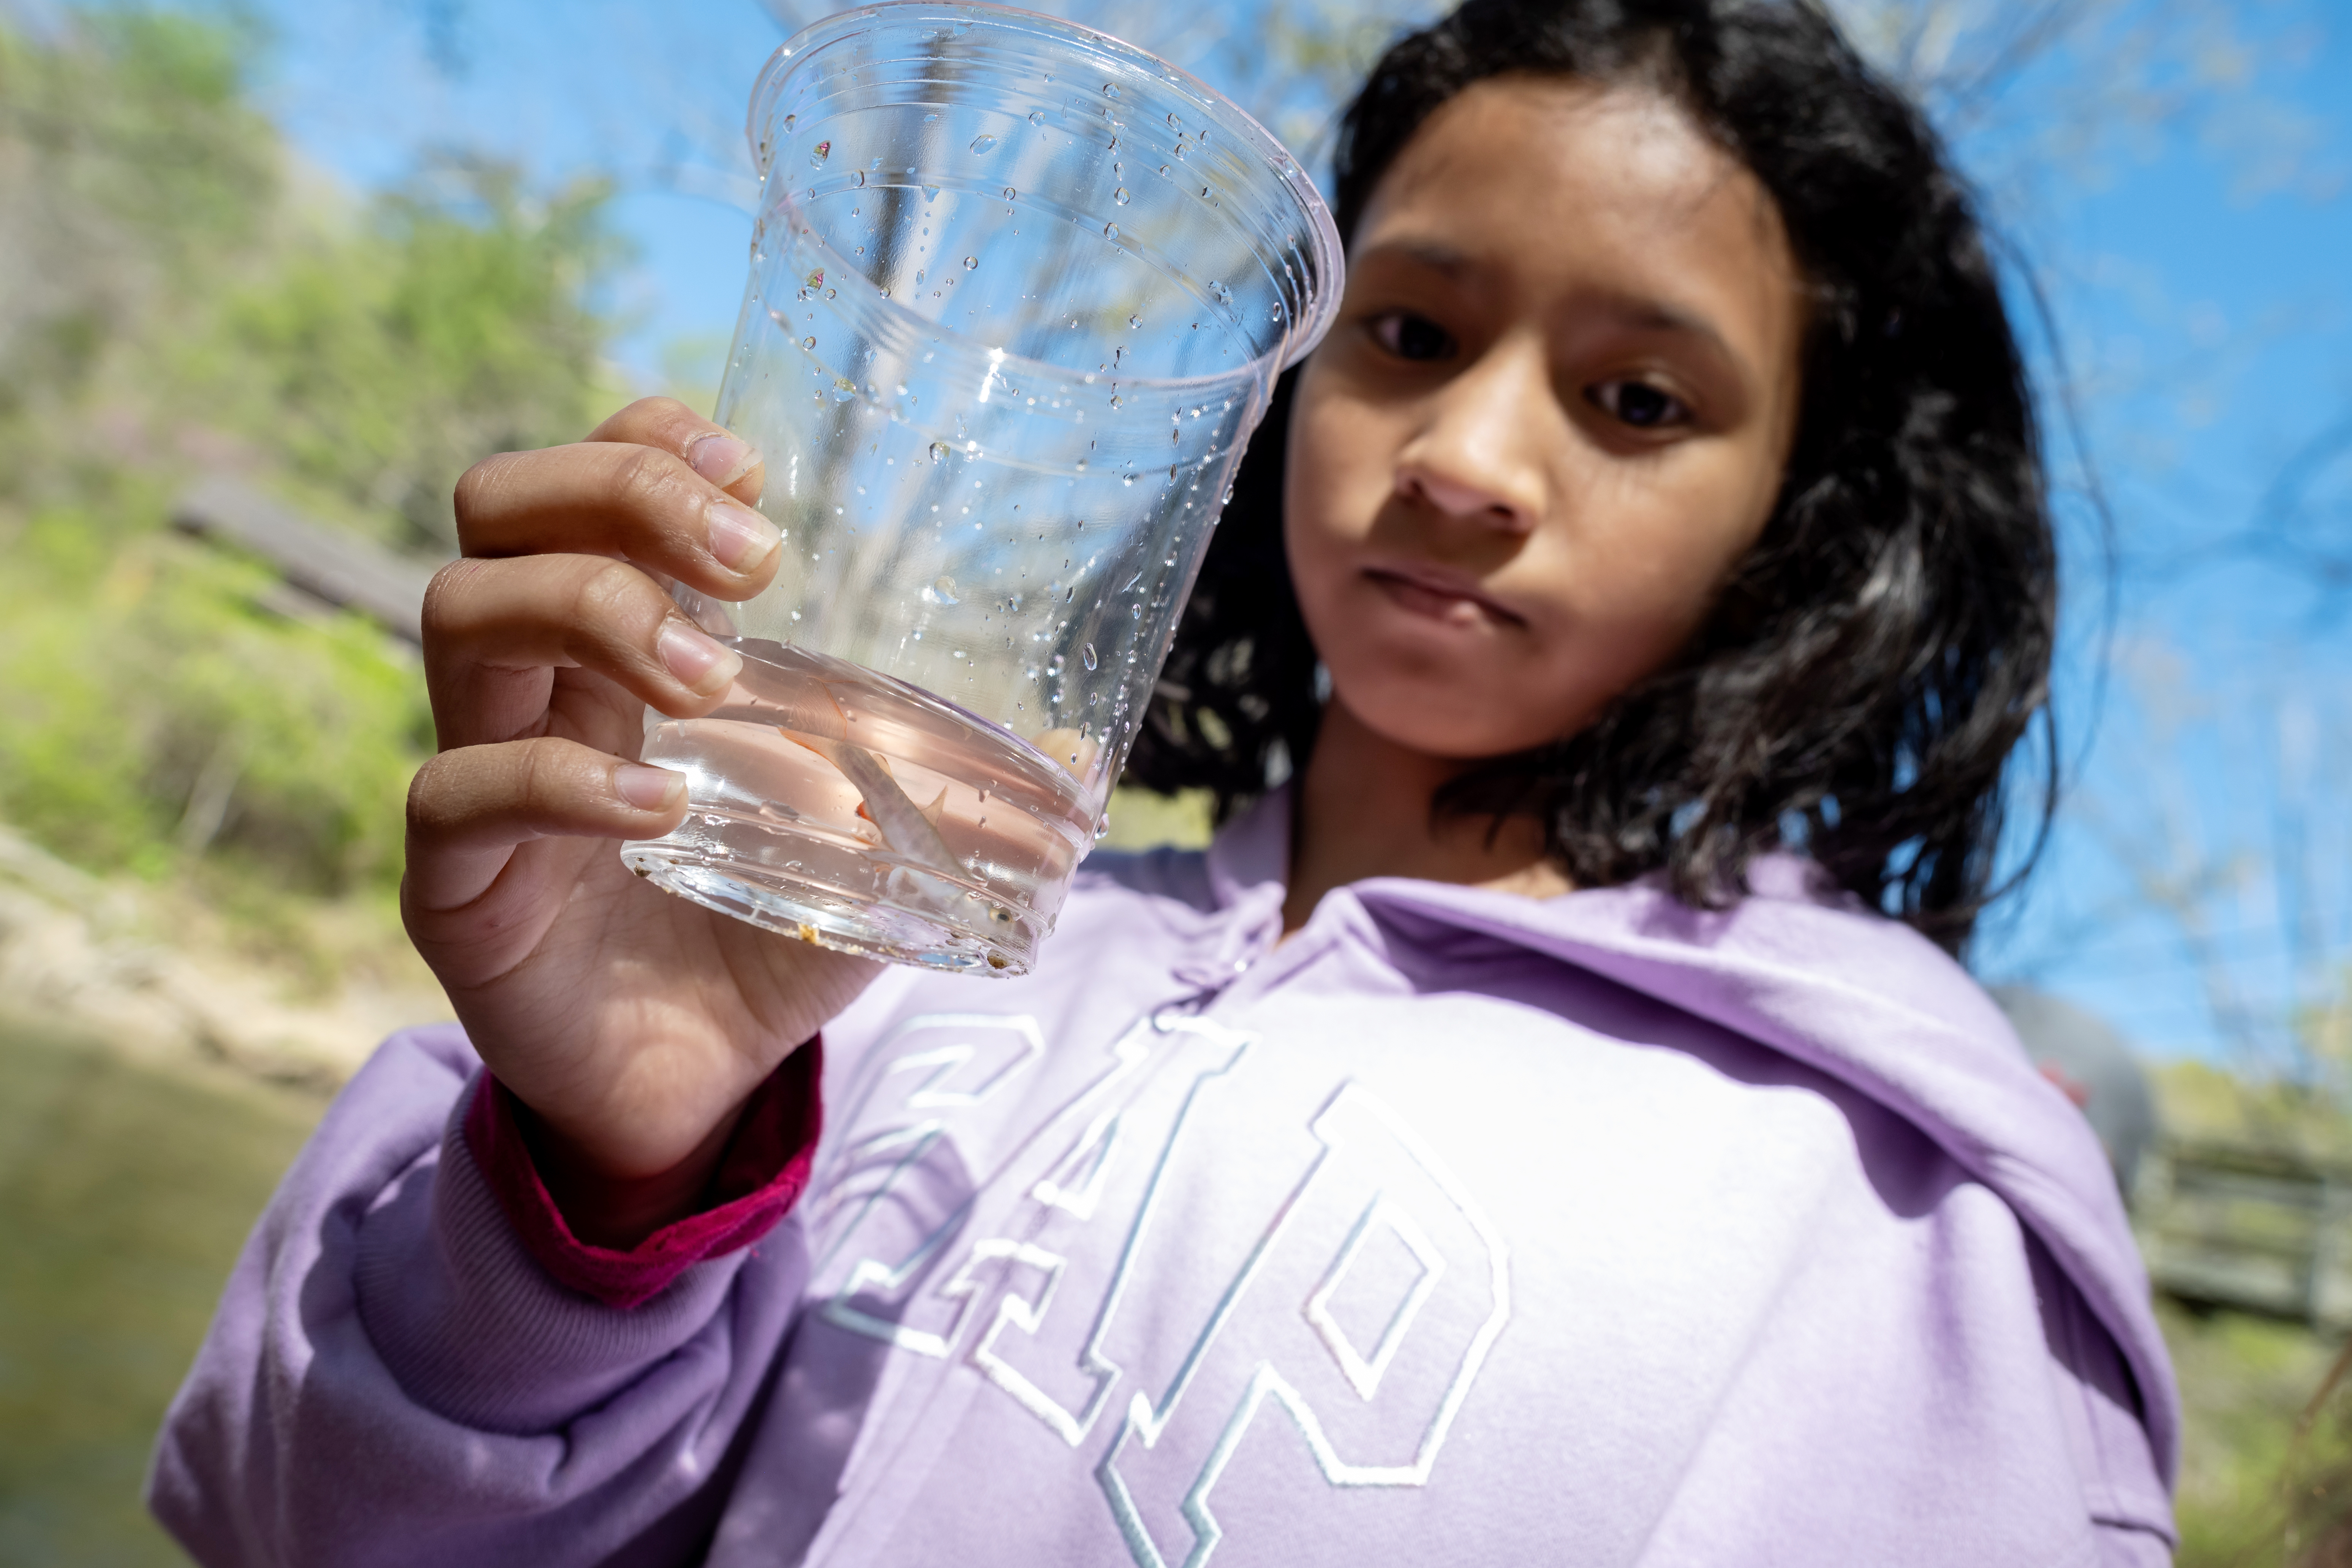 A student holds up a cup containing a fry. The fish, about two inches long, swims toward the bottom of the cup.